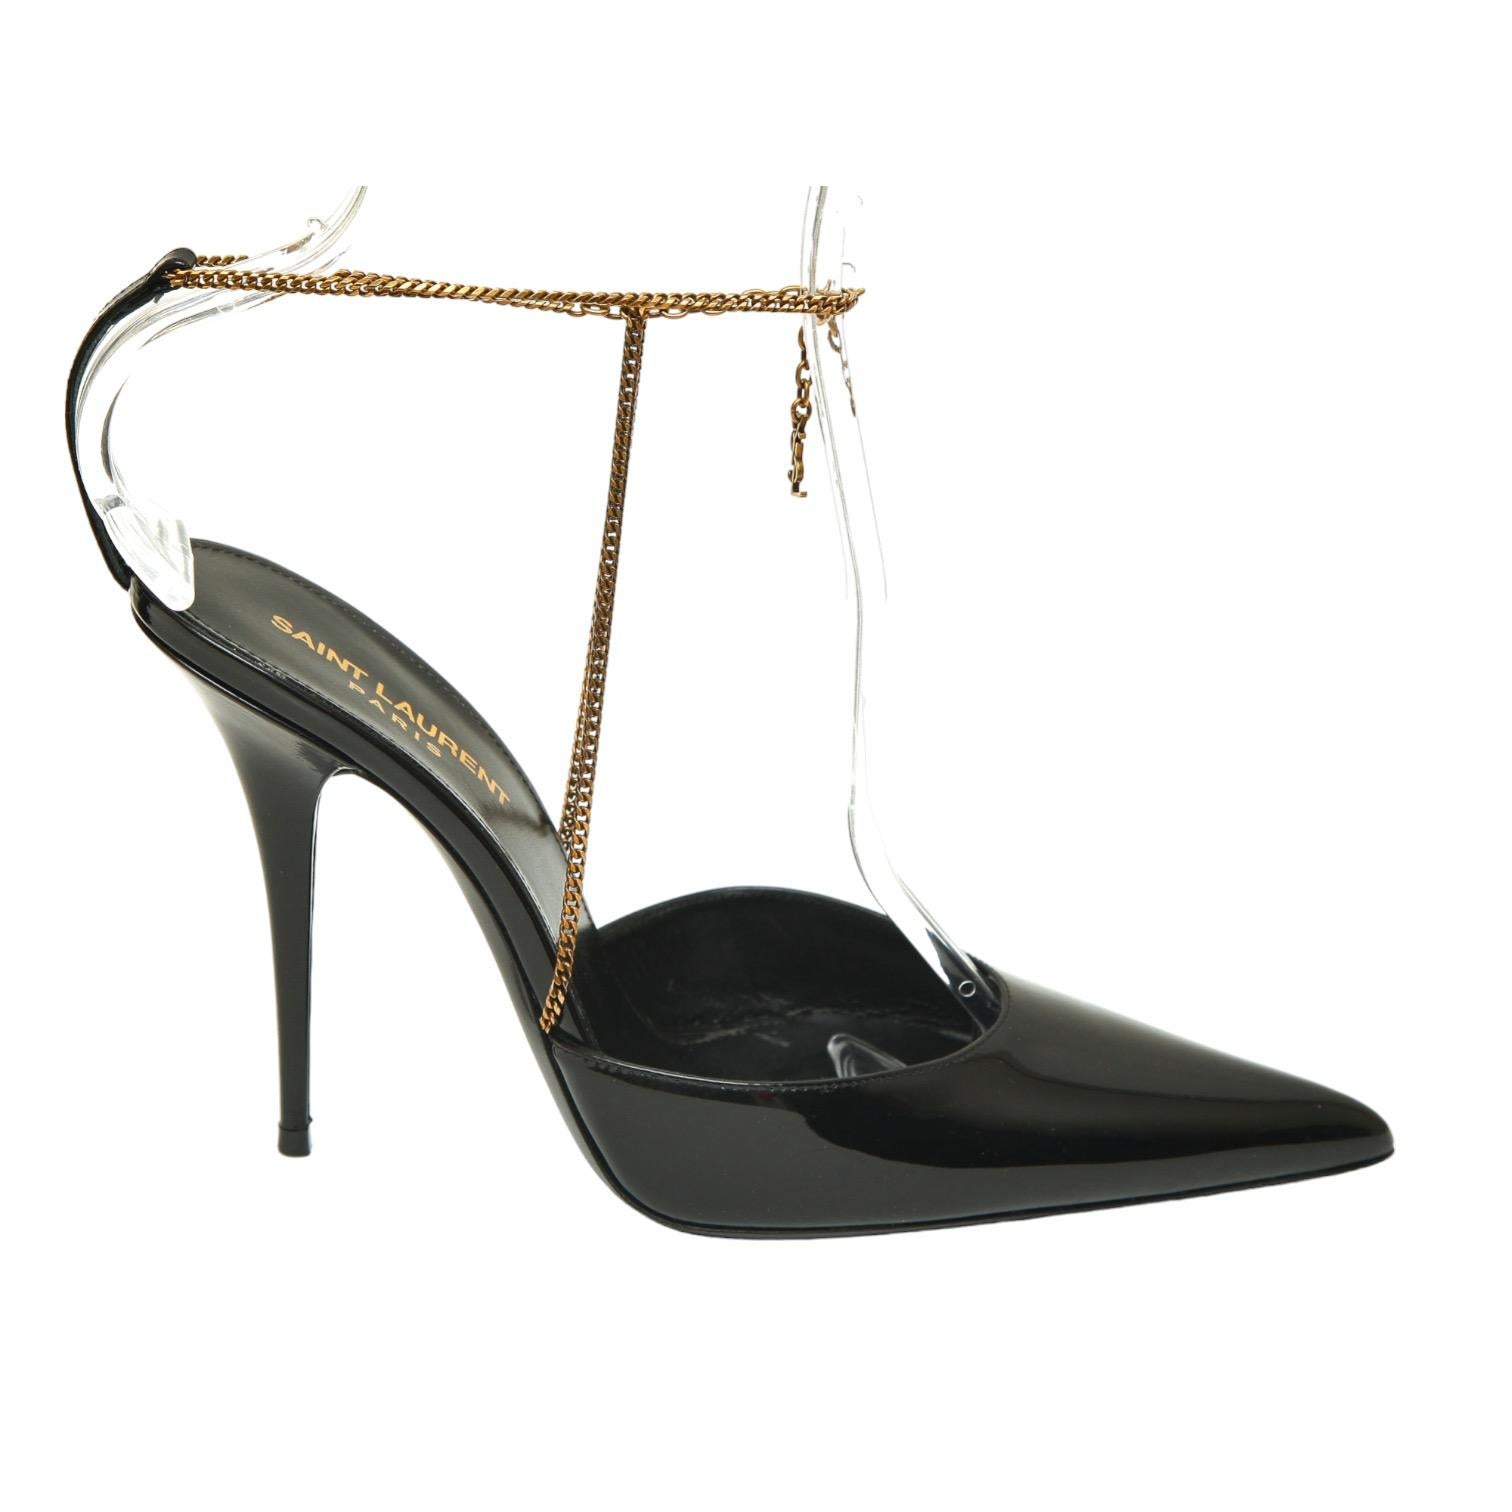 GUARANTEED AUTHENTIC SAINT LAURENT BLACK PATENT LEATHER CLAW CHAIN PUMPS

Retail excluding sales taxes $1,590.

Details:
- Black patent leather uppers.
- Pointed toe.
- Antique gold ankle chain with hanging YSL logo.
- Claw clasp closure.
- Self